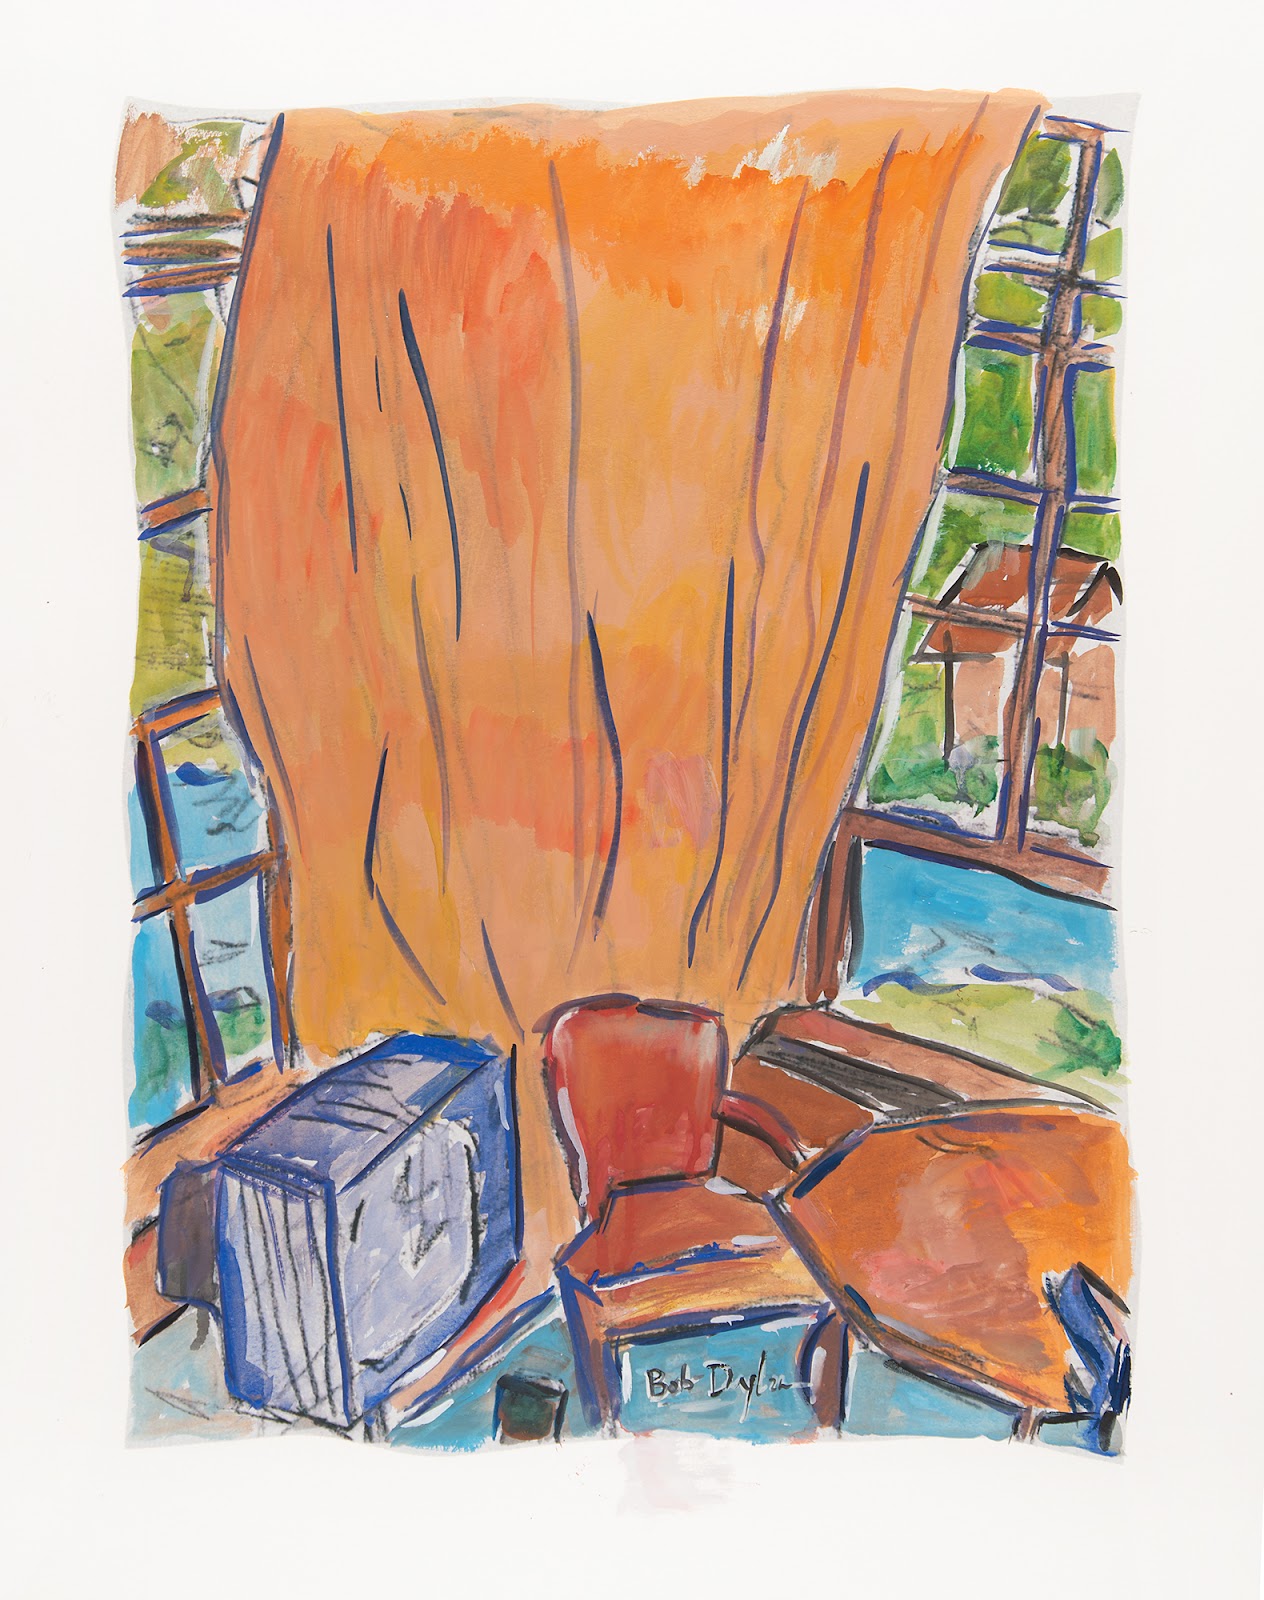 Dylan’s painting ‘View from Two Windows’ from his ‘Drawn Blank’ series, depicting an upper story room overlooking a body of water. This painting was previously exhibited at the Halcyon Gallery of London in 2008.